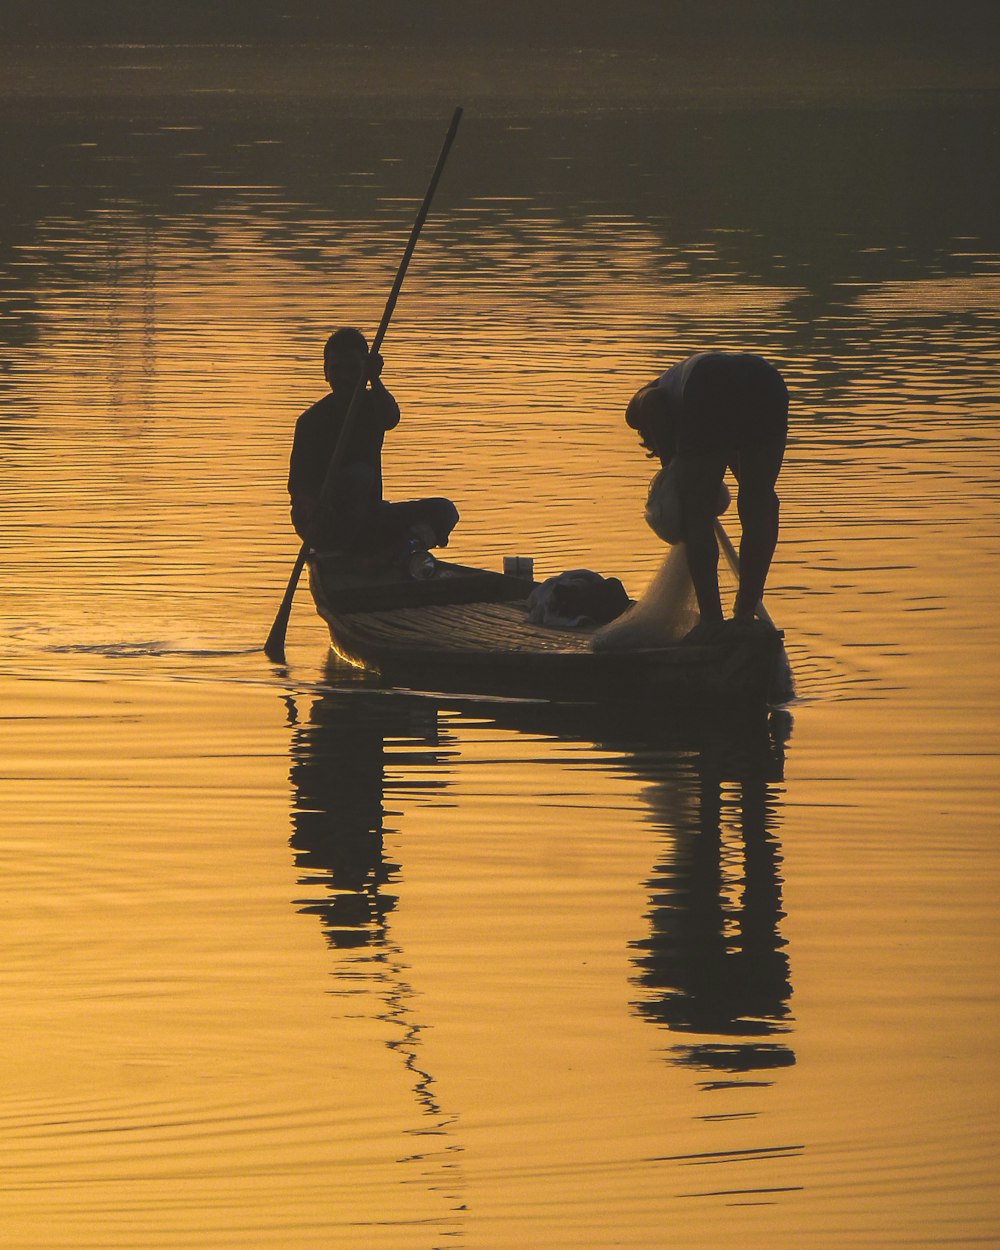 silhouette of 2 person riding on boat during sunset